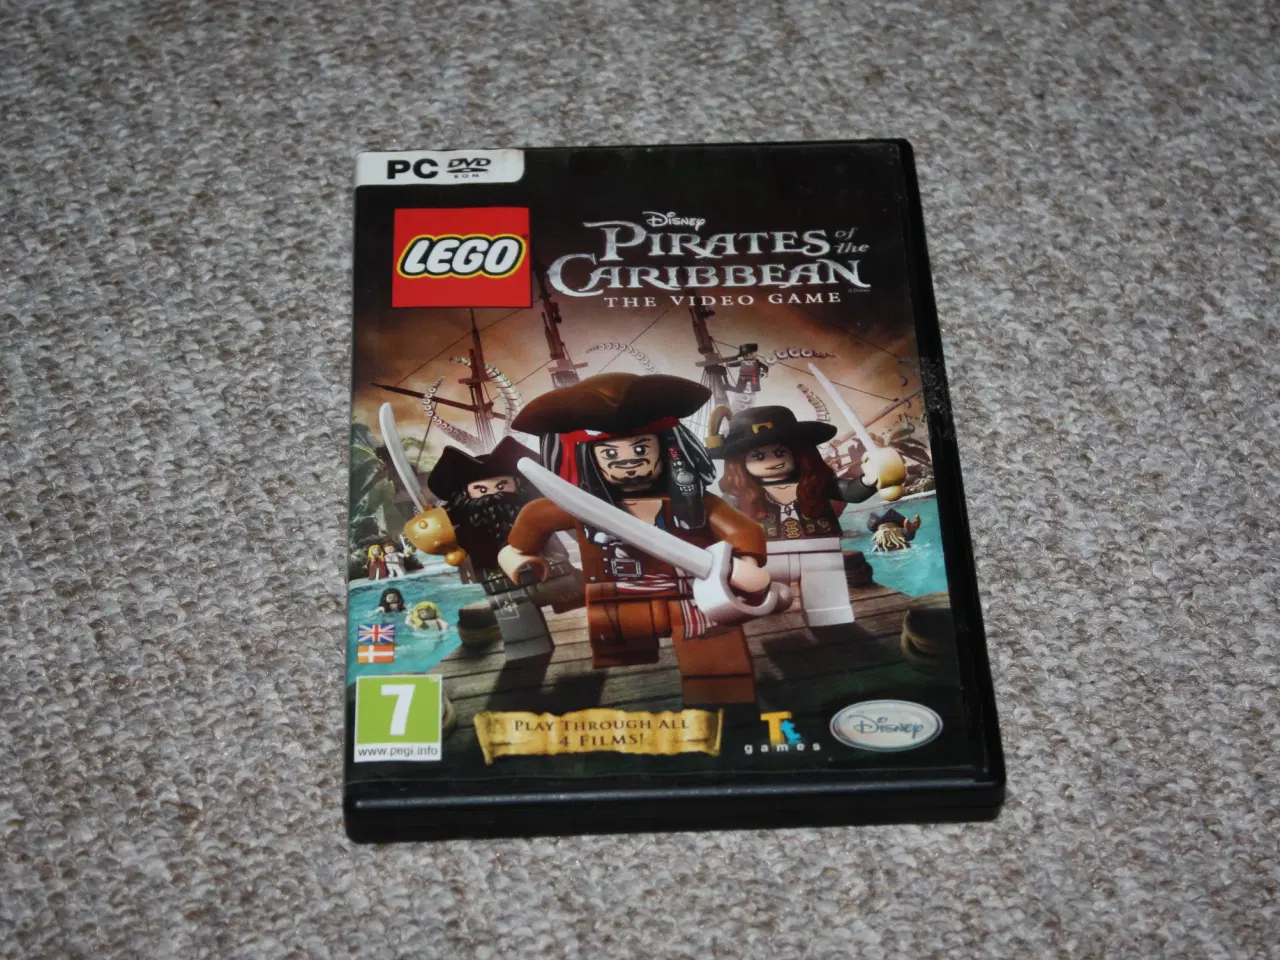 Billede 1 - LEGO Pirates of the Caribbean The Video Game (PC)